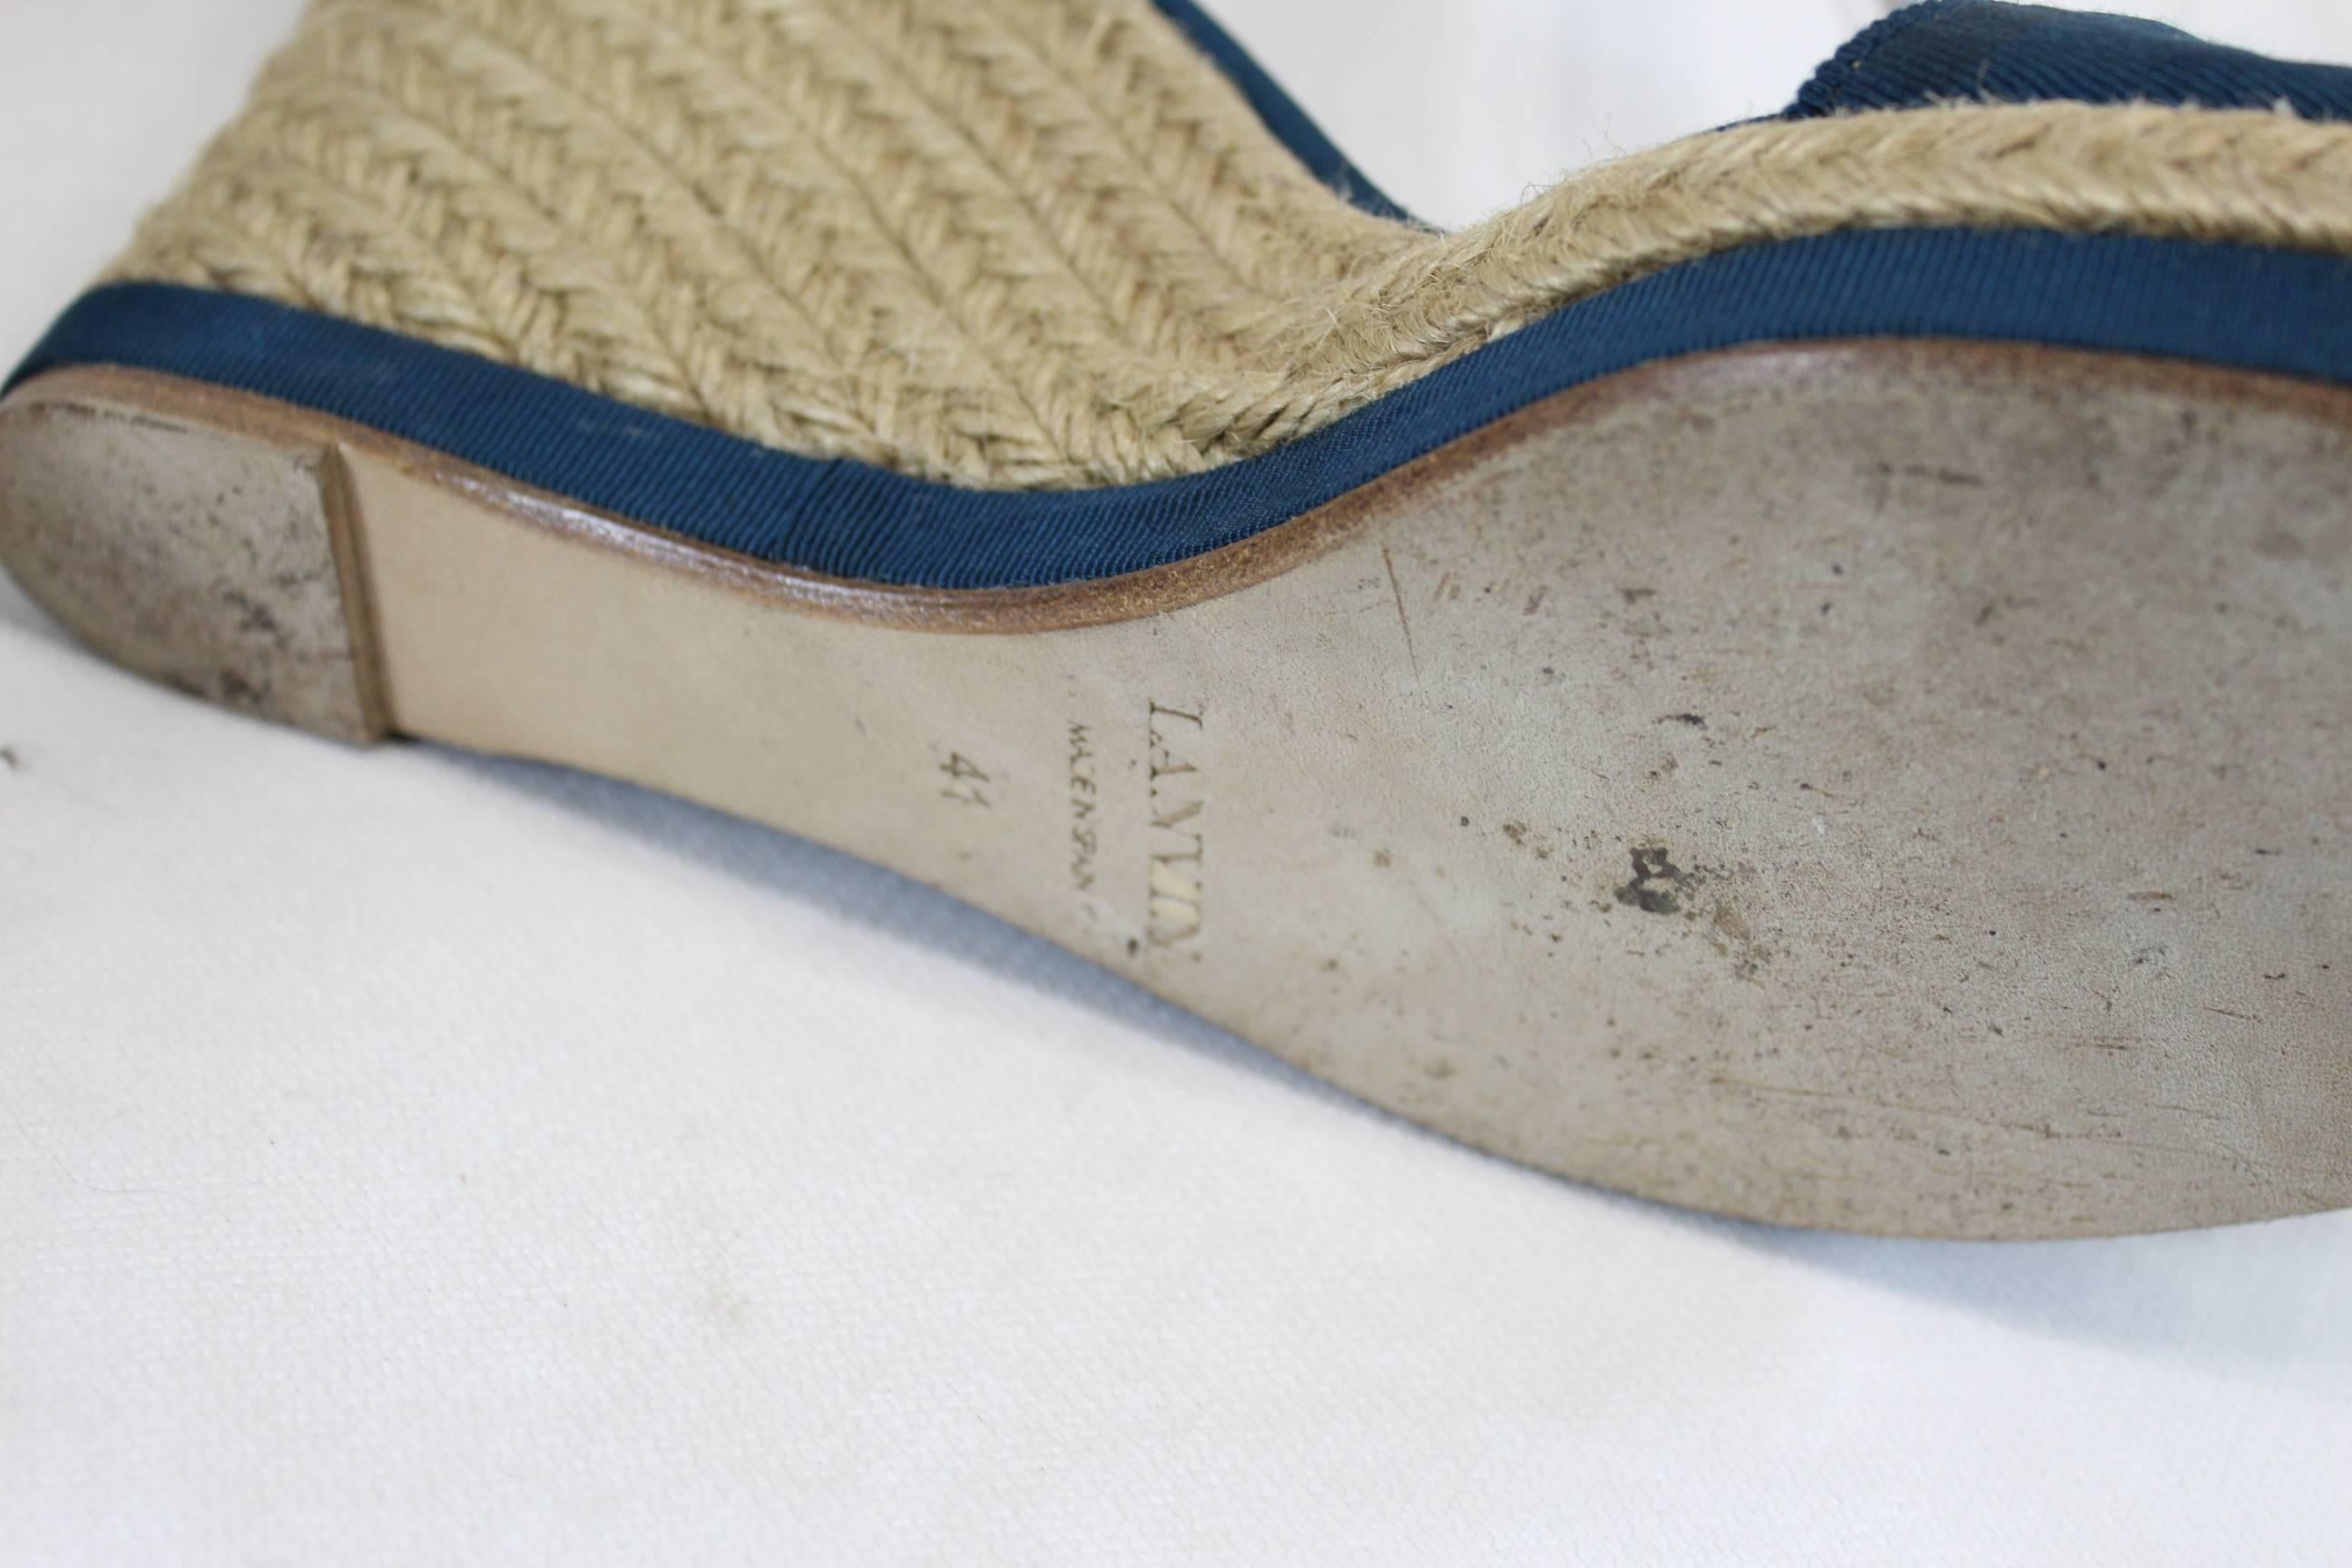 Really nice espadriles from Lanvin in canvas and cord.

used but in good condition (see images)

Size US 9
